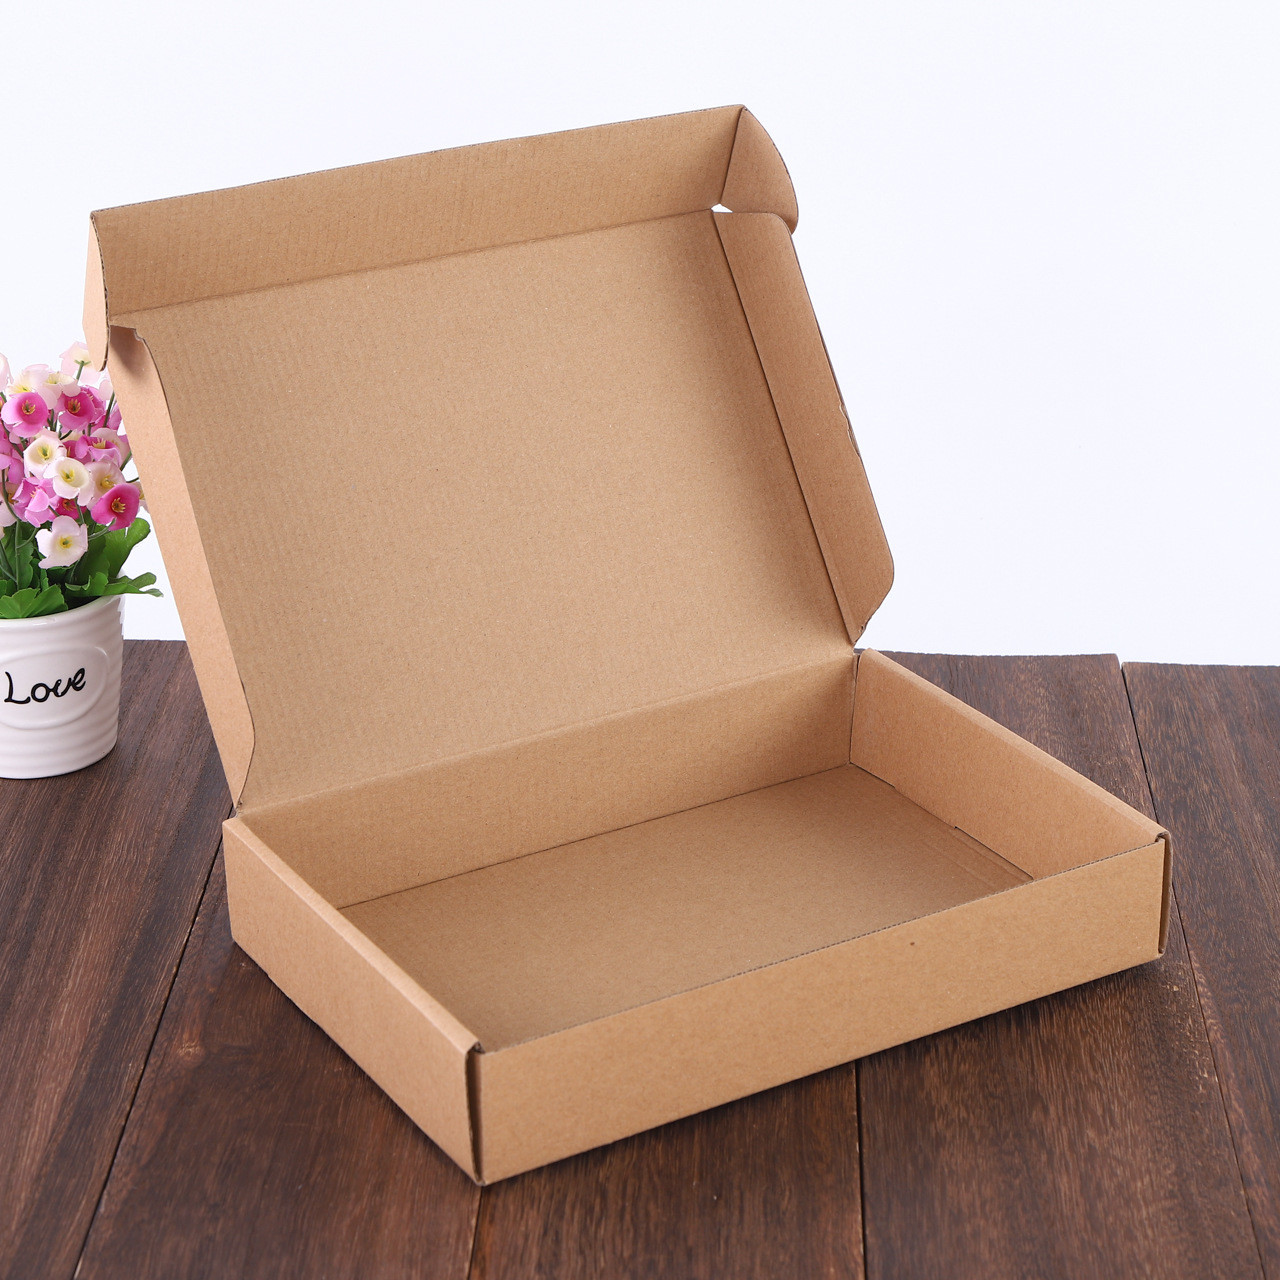 Best Packaging 450x350x160mm Boxes , Apparel Cardboard Mail Boxes wholesale